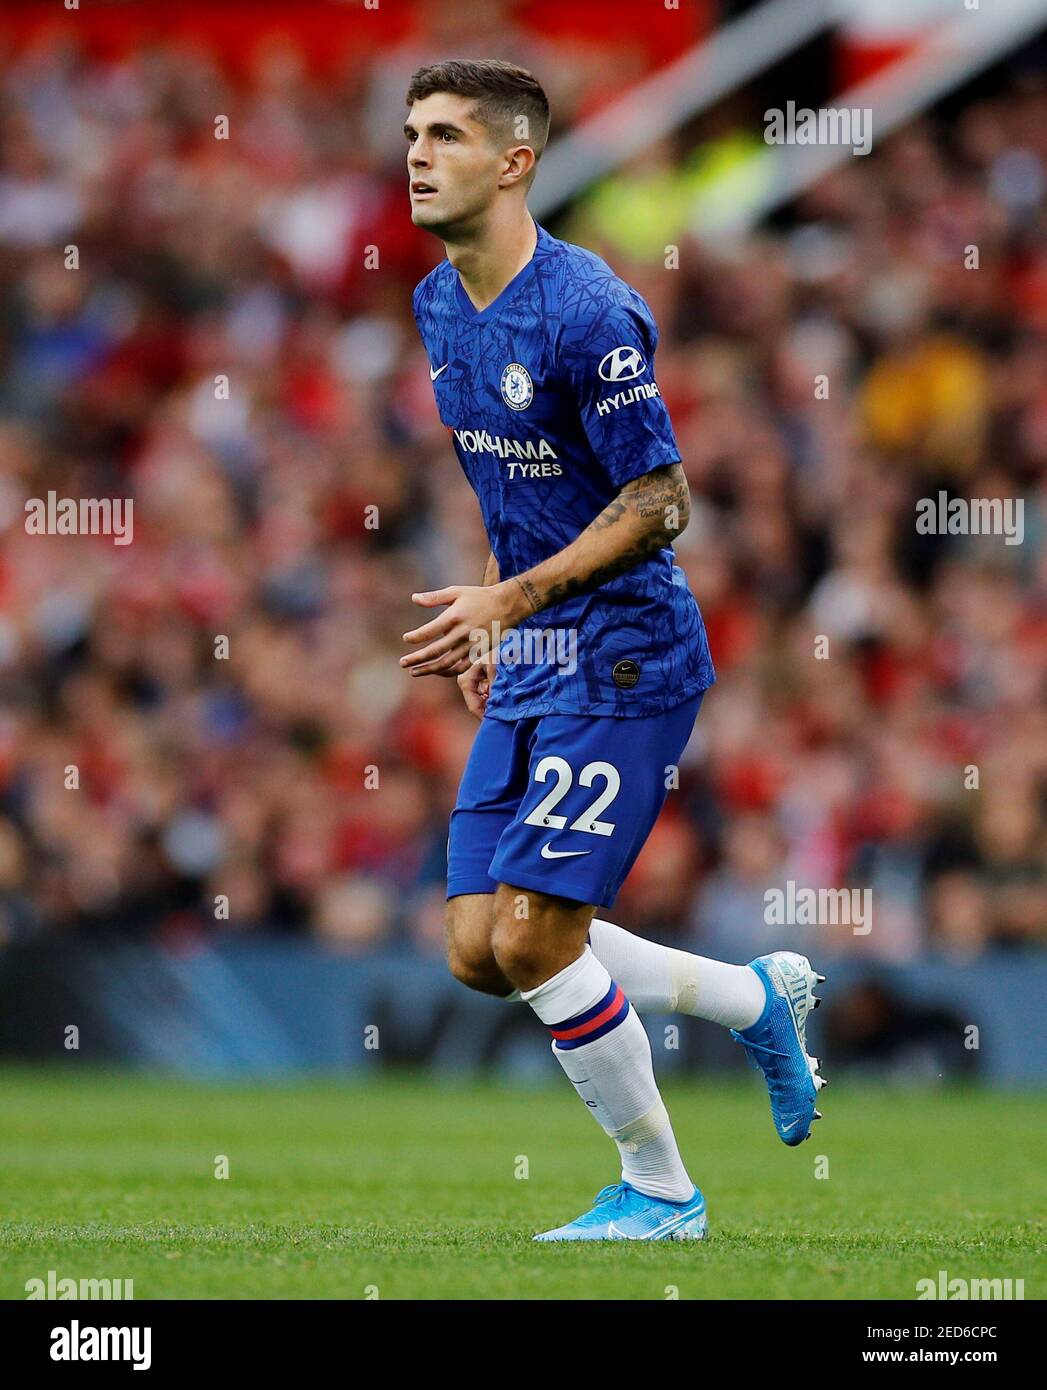 Soccer Football - Premier League - Manchester United v Chelsea - Old Trafford, Manchester, Britain - August 11, 2019  Chelsea's Christian Pulisic during the match   REUTERS/Phil Noble  EDITORIAL USE ONLY. No use with unauthorized audio, video, data, fixture lists, club/league logos or 'live' services. Online in-match use limited to 75 images, no video emulation. No use in betting, games or single club/league/player publications.  Please contact your account representative for further details. Stock Photo